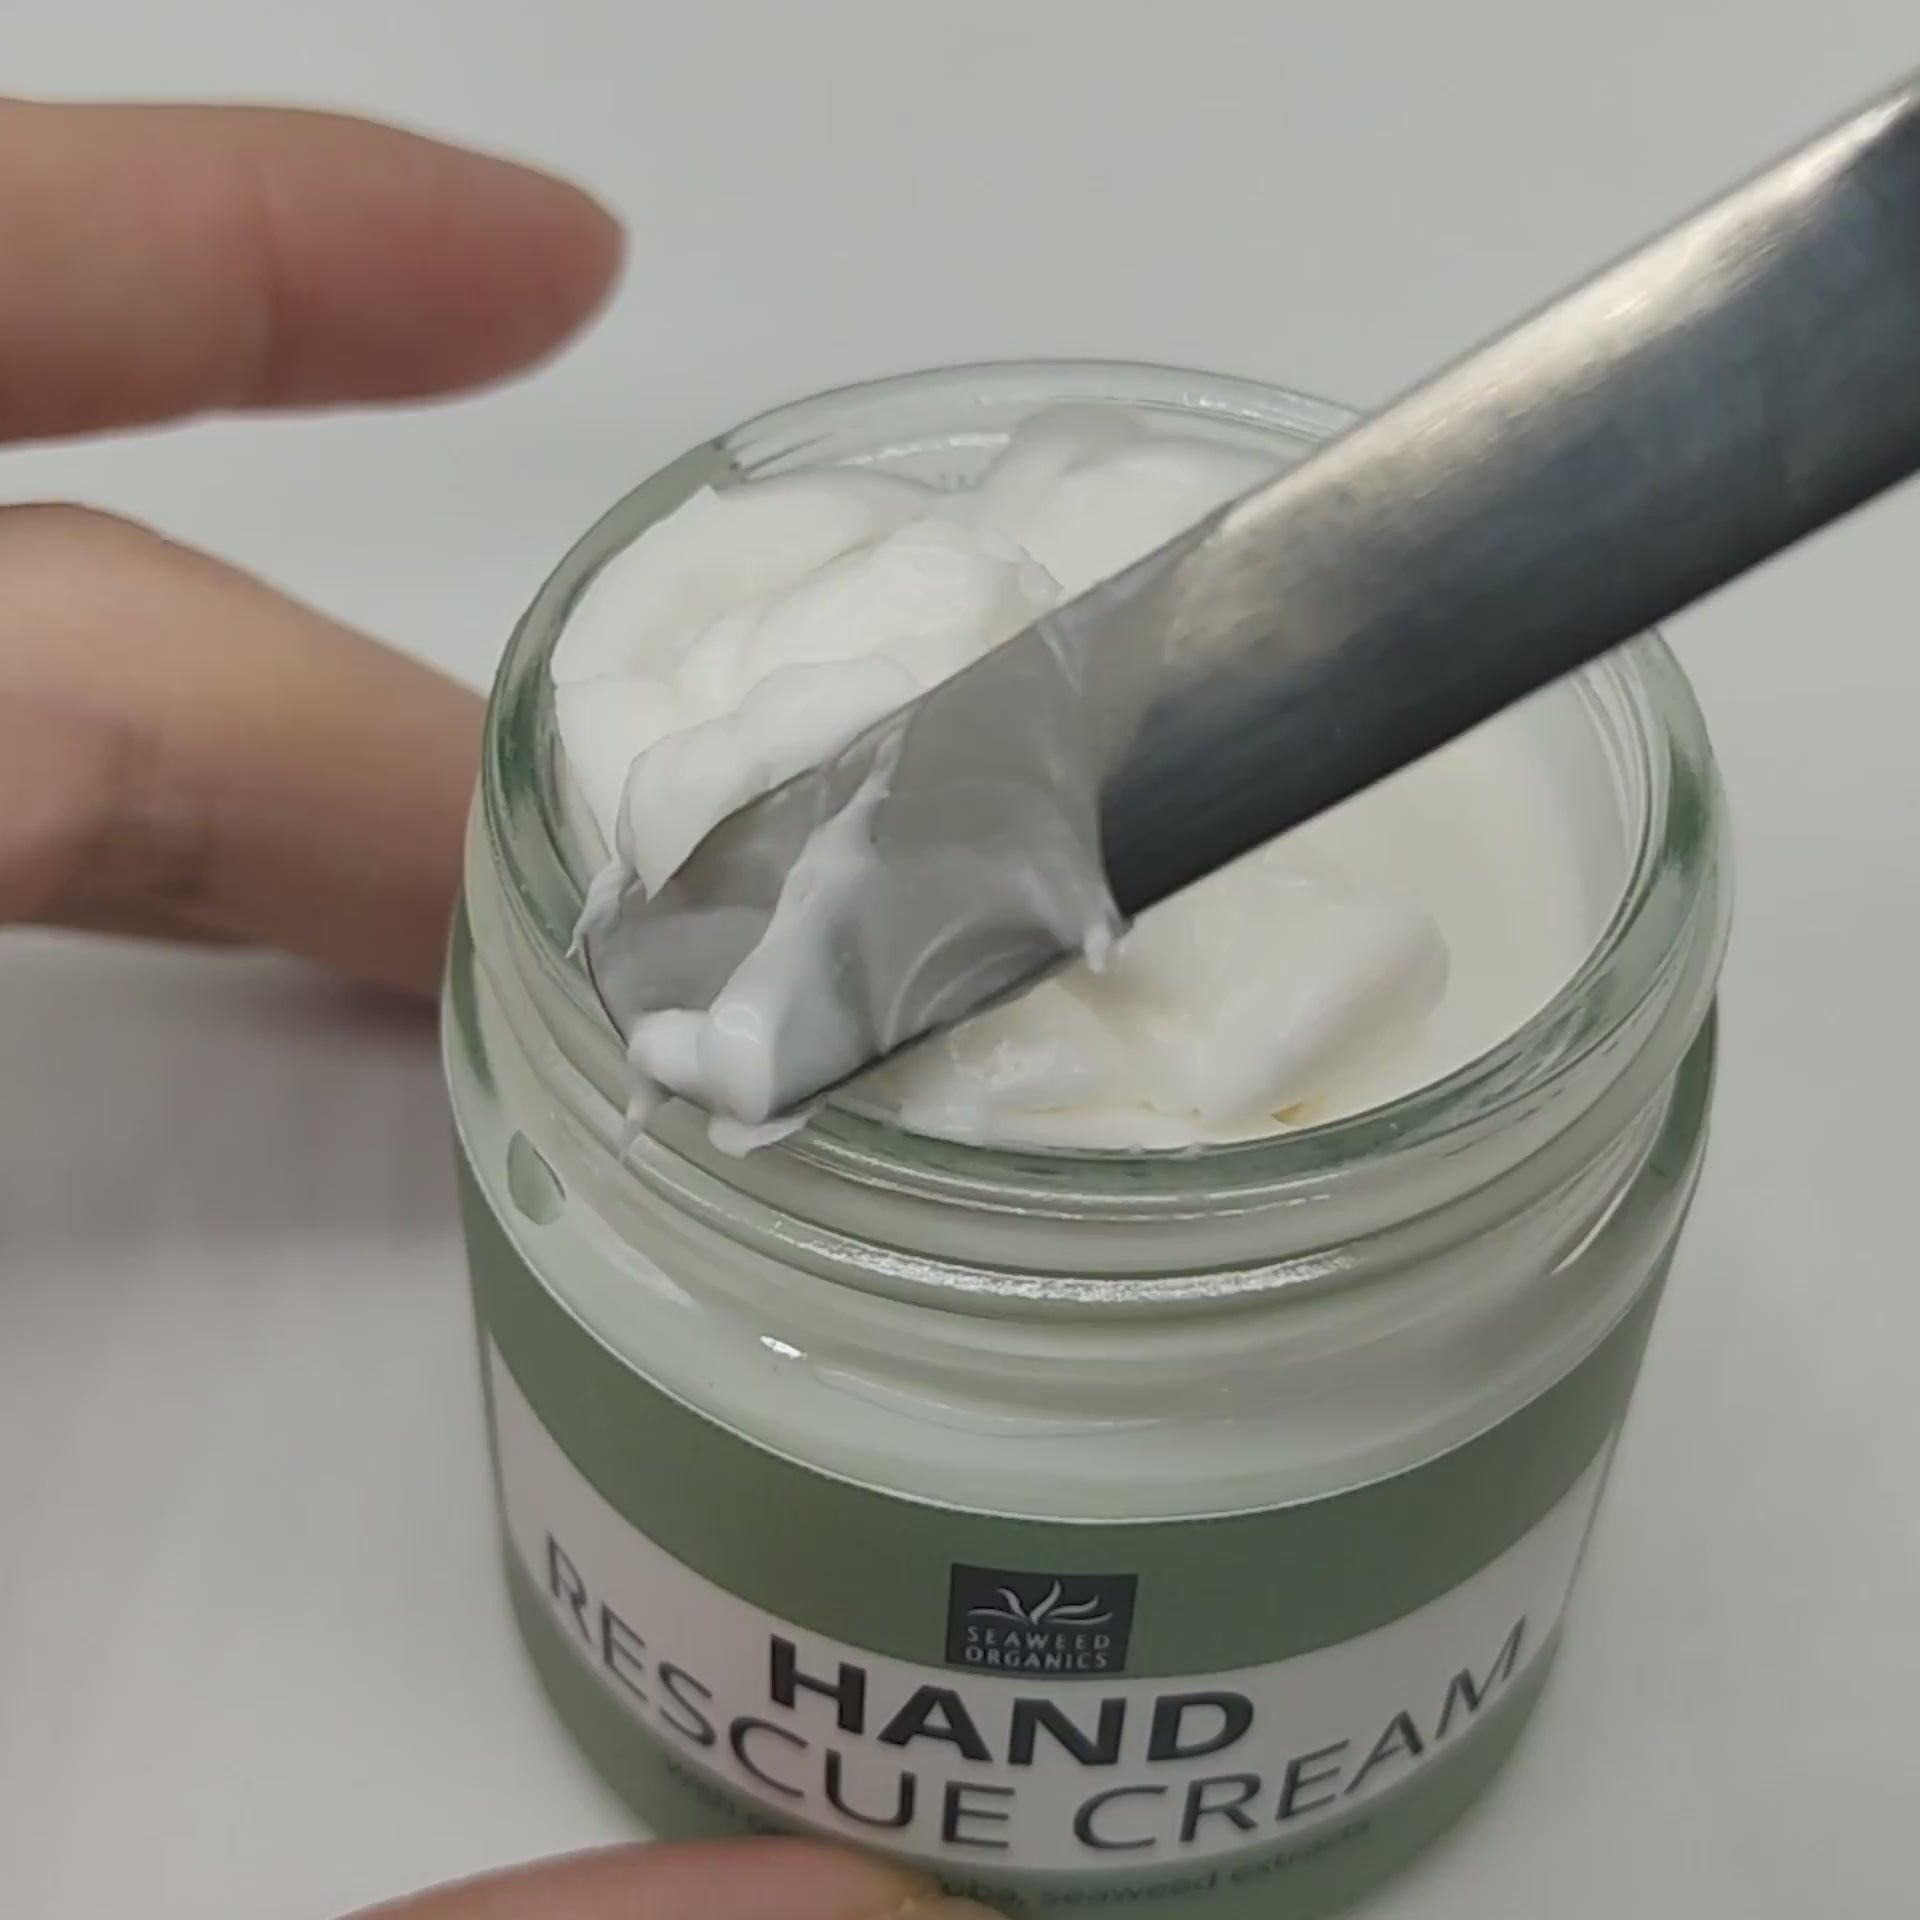 Seaweed organics rich Hand Rescue Cream with Scottish Jojoba seed oil, seaweed extract. Prevent acne and keep hydrating your hands. white and buttery texture. regiestered SCPN in the UK.